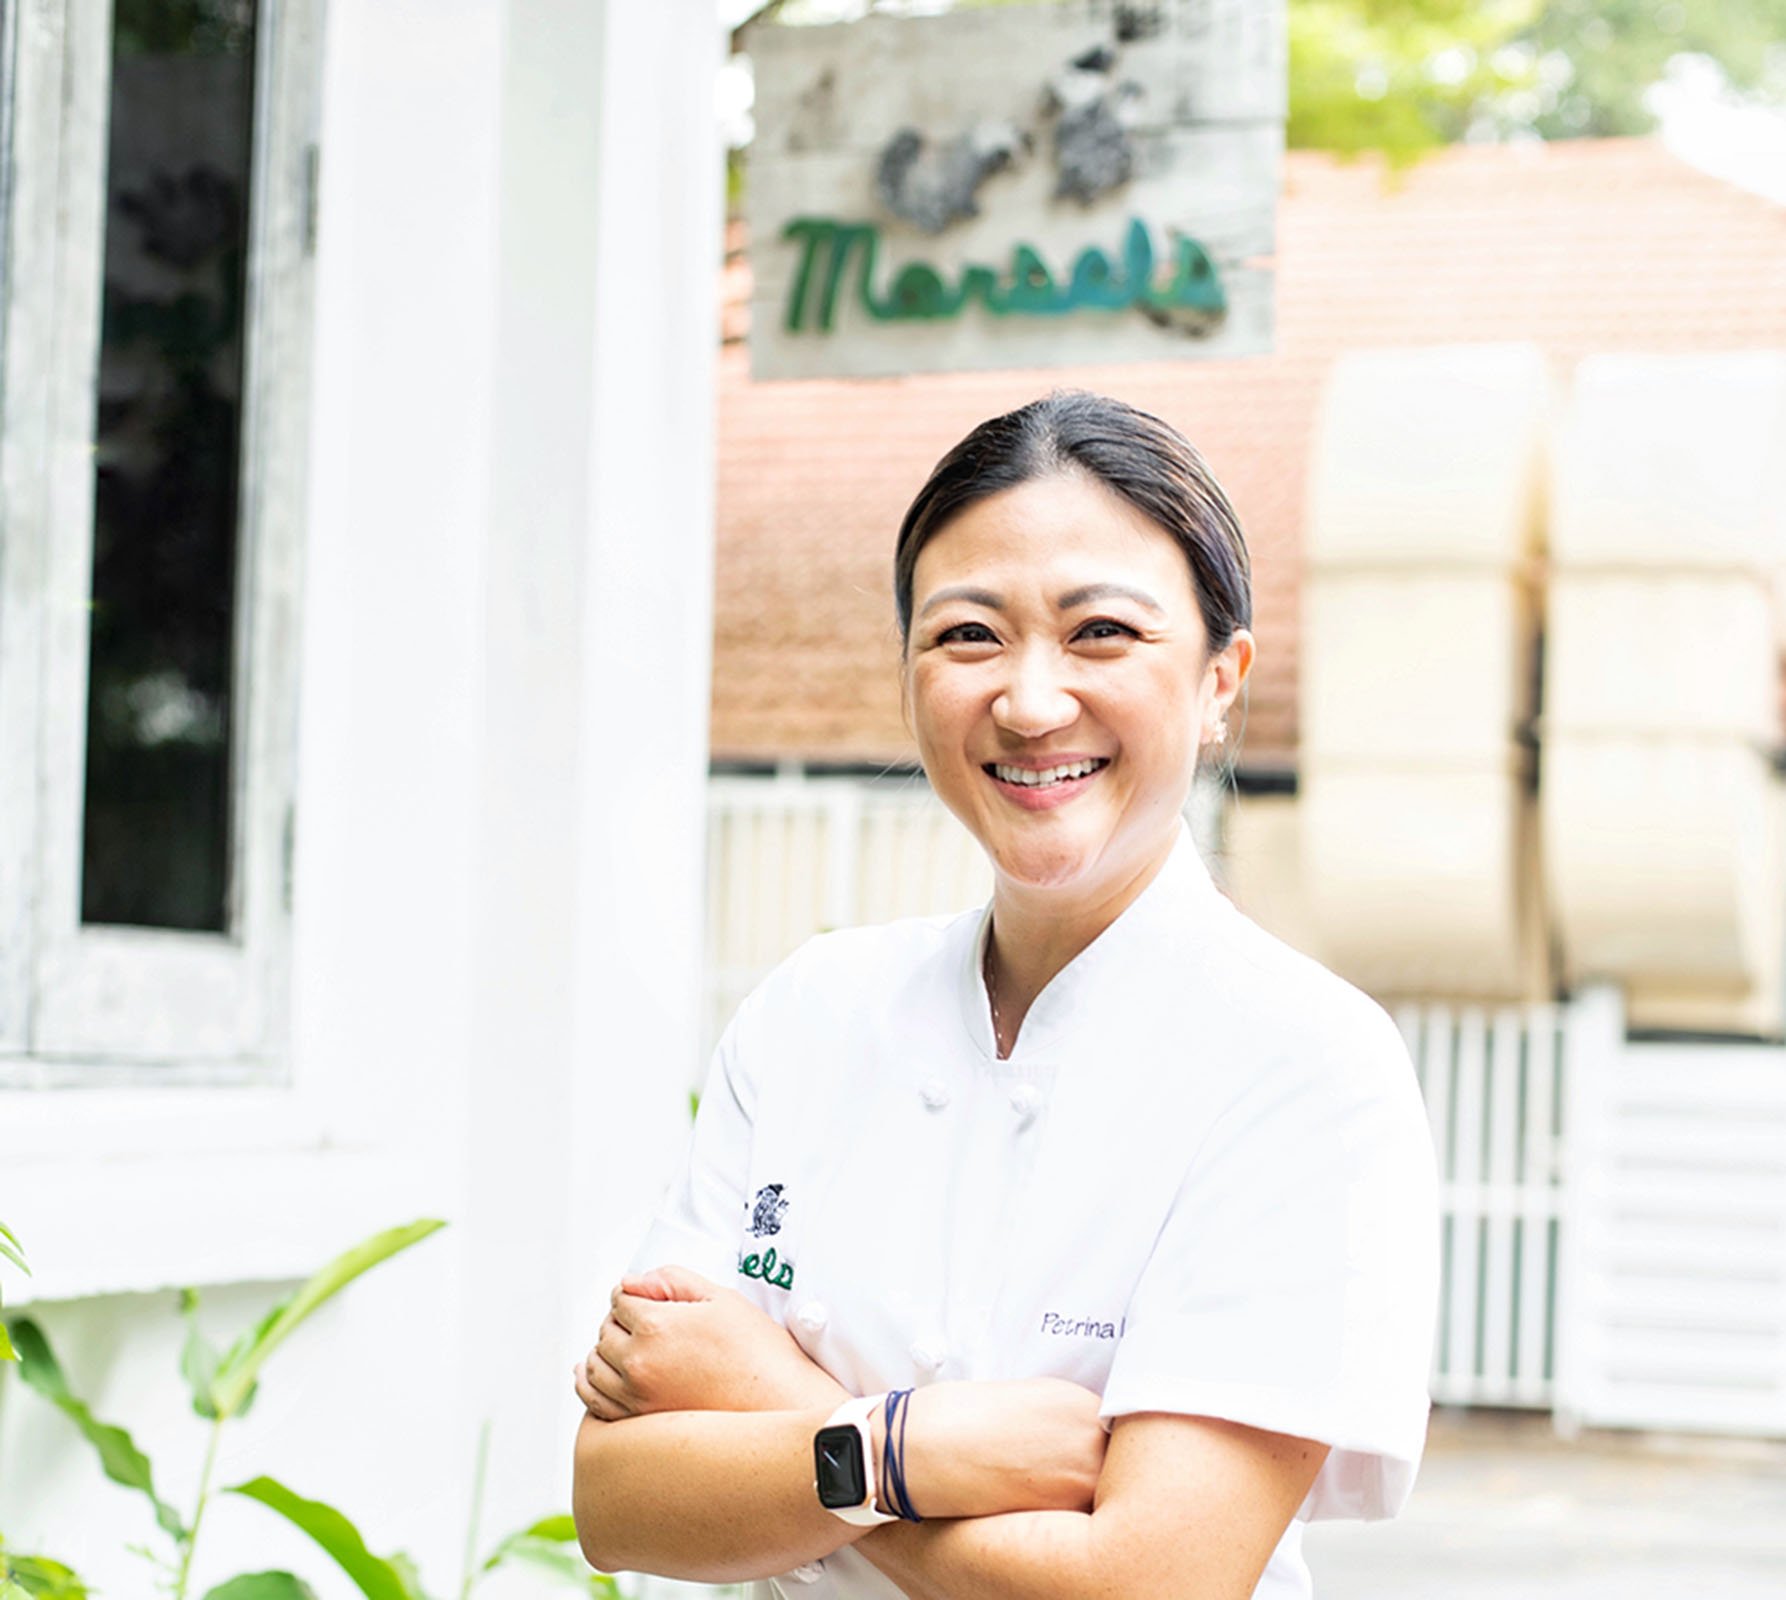 Chef-Owner Petrina Loh was mentored in lauded Michelin-starred restaurants in the San Francisco Bay Area.